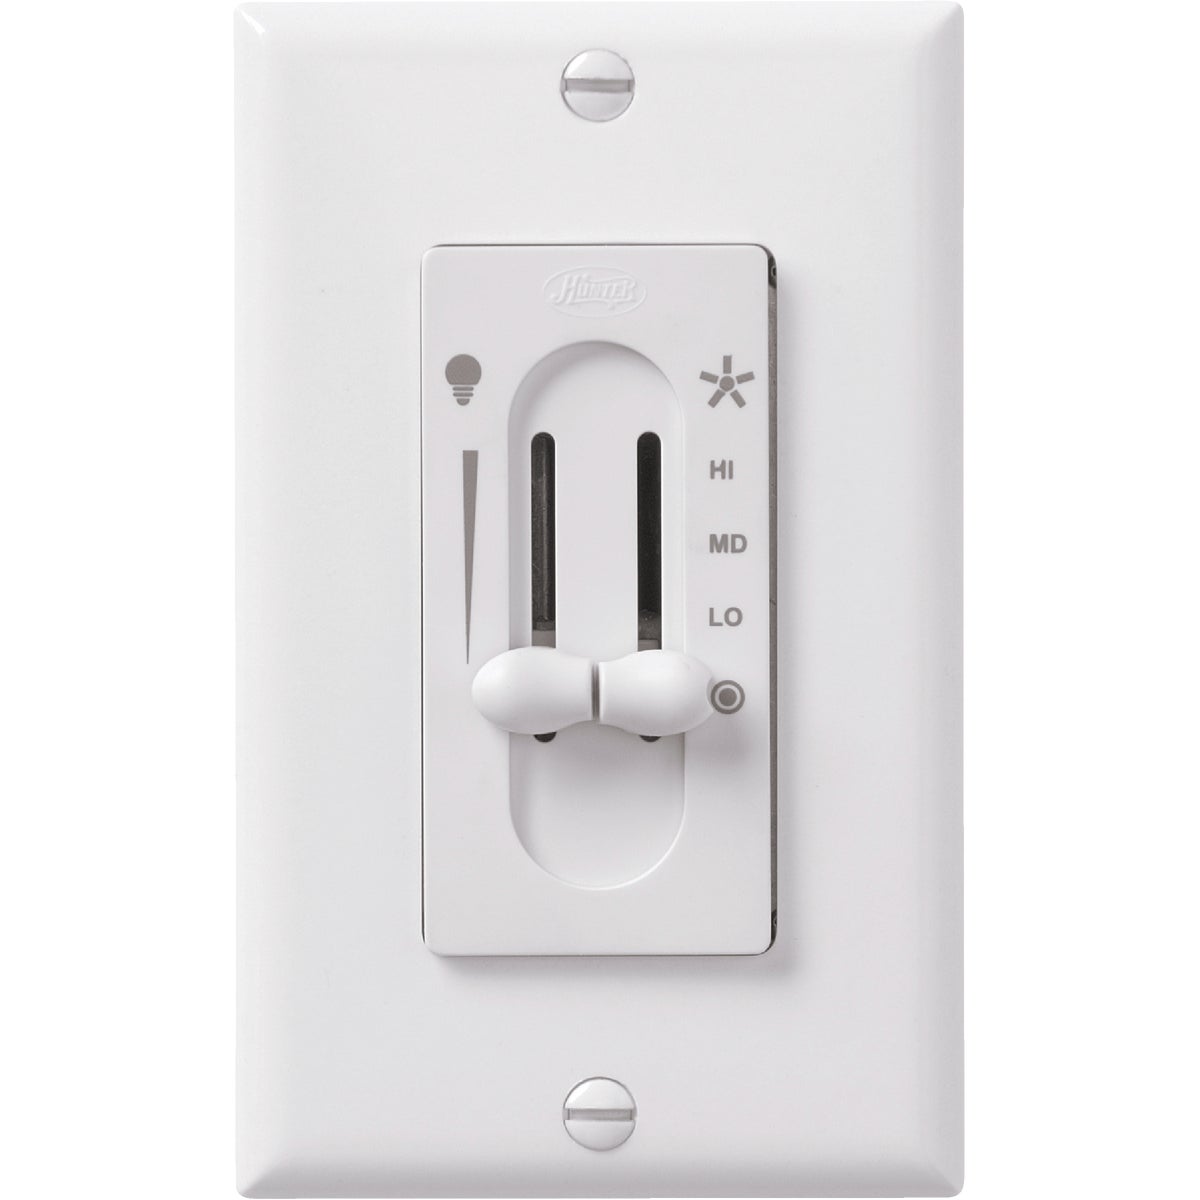 Item 531626, Wall mounted dual slide control provides 3 fan speeds and full range light 